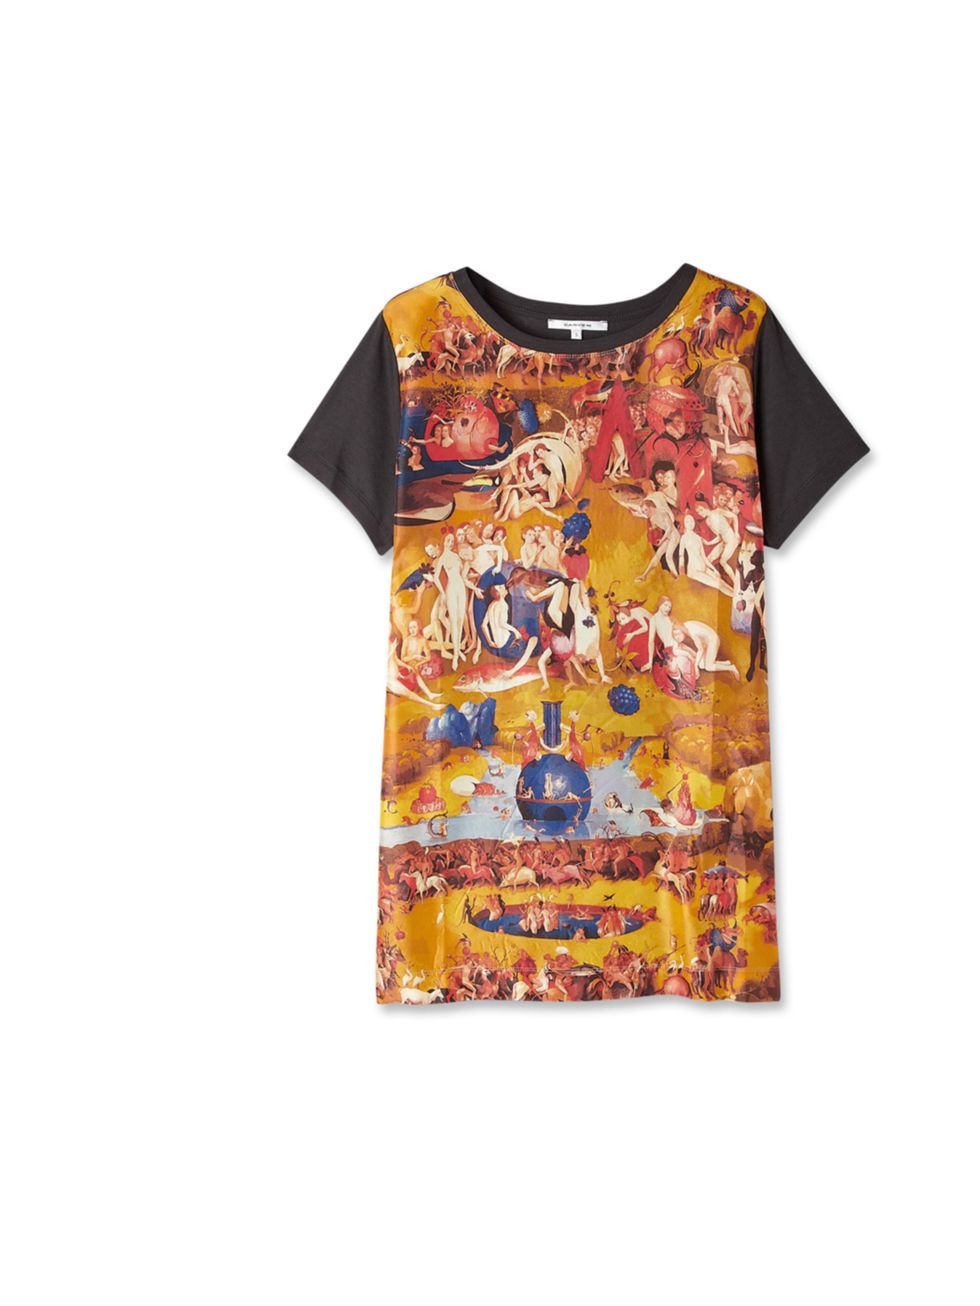 <p>Trust us, everyone needs a statement T-shirt. Worn with denim cut-offs or leather trousers and heels, this Carven number is multi-functional fashion at its best Carven printed silk T-shirt, £145, at My-Wardrobe</p><p><a href="http://shopping.elleuk.co